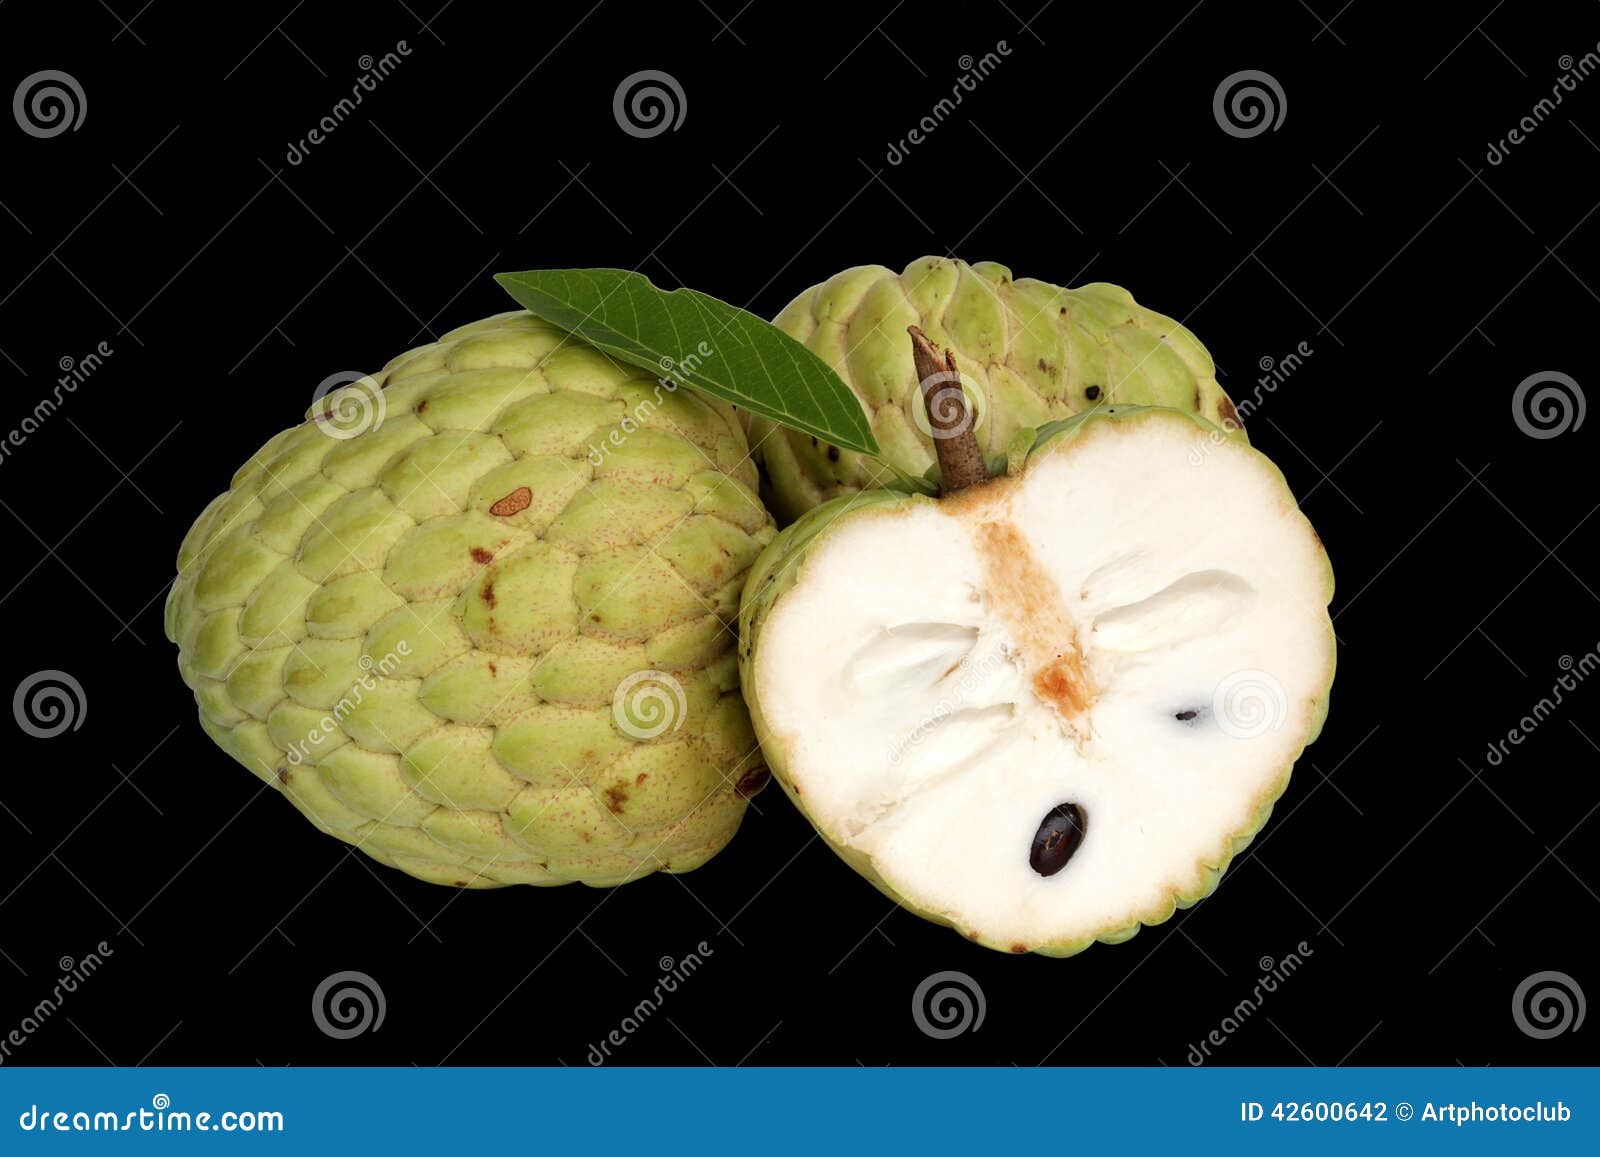 whole and partial cherimoya fruit